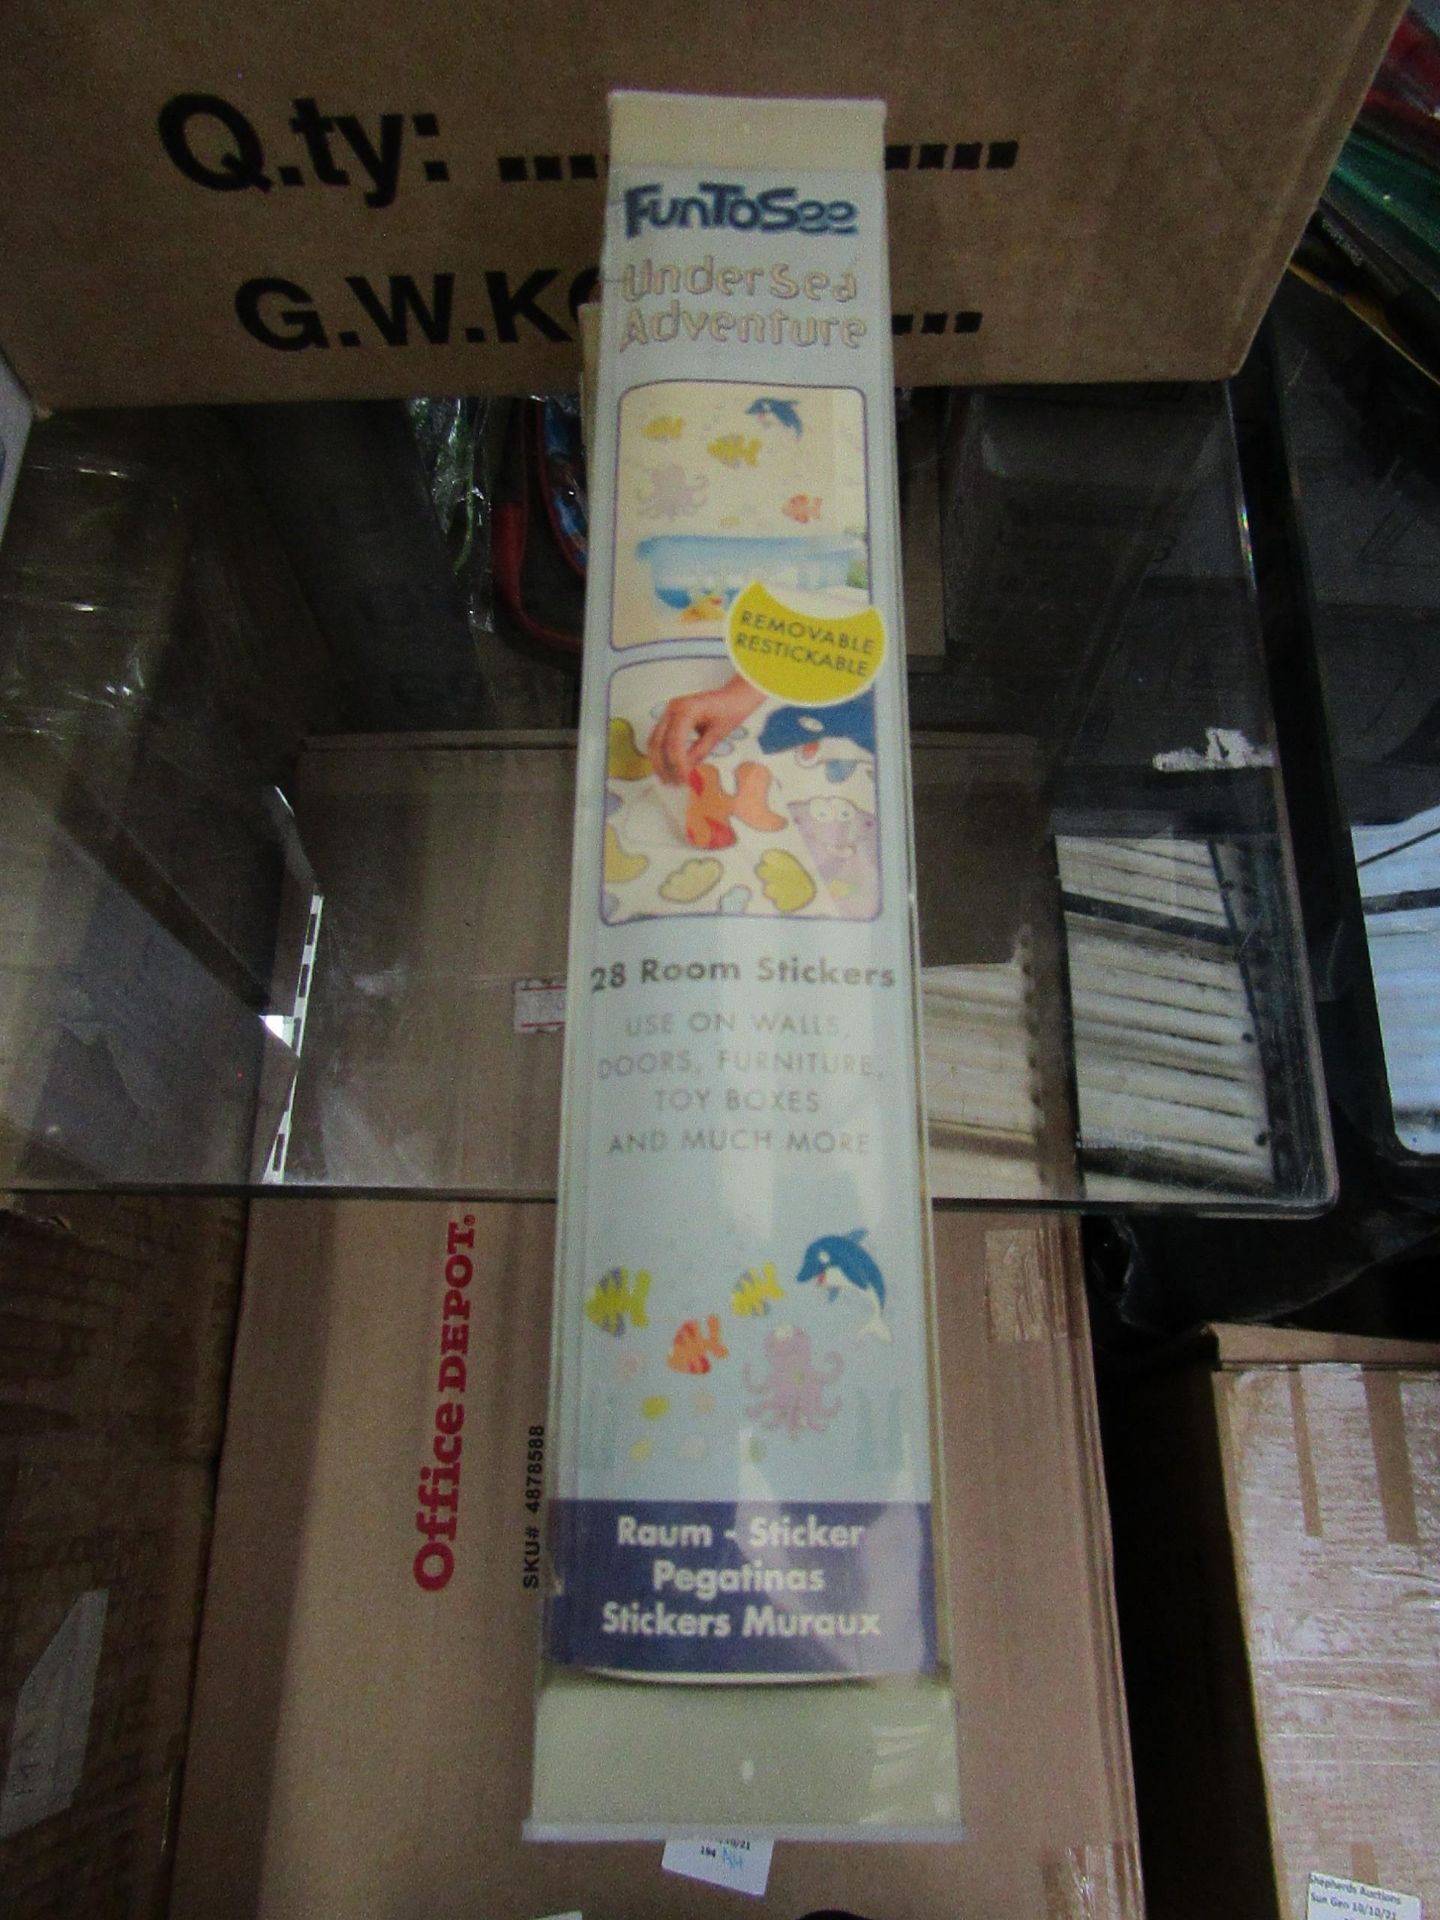 2X FUNTOSE UNDER SEA ADVENTURE 28 ROOM STICKERS. LOOK NEW IN DAMAGED PACKAGE.